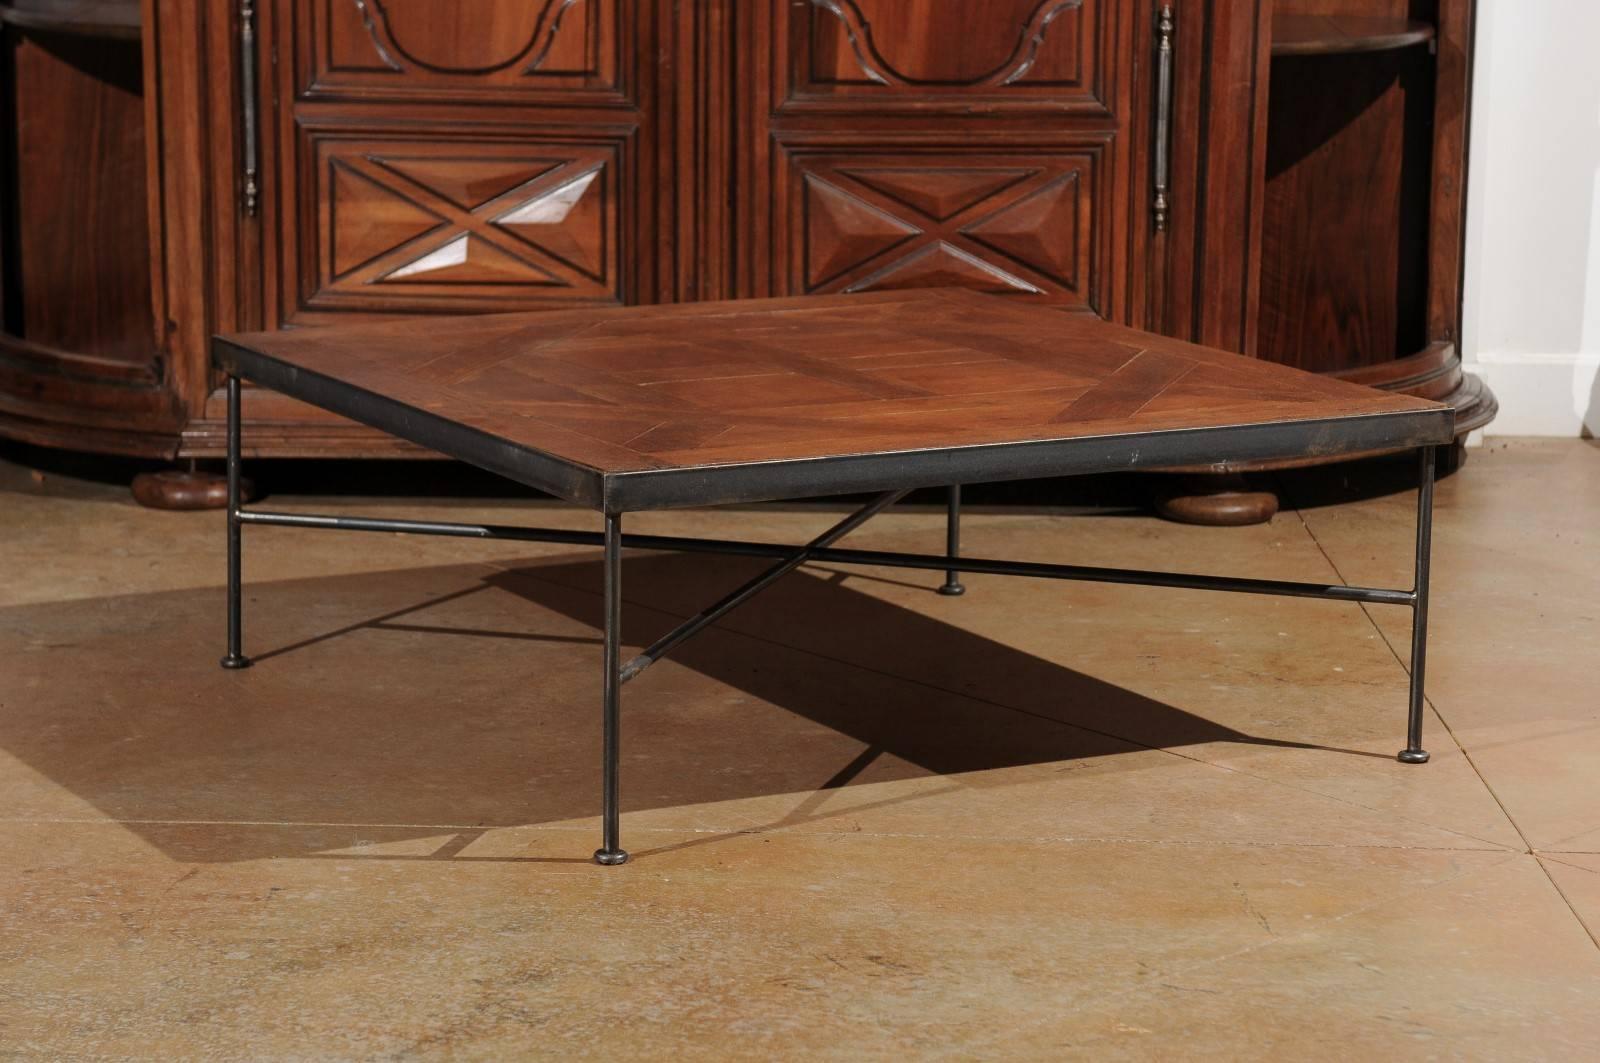 This French square shaped coffee table is made of a 19th century 